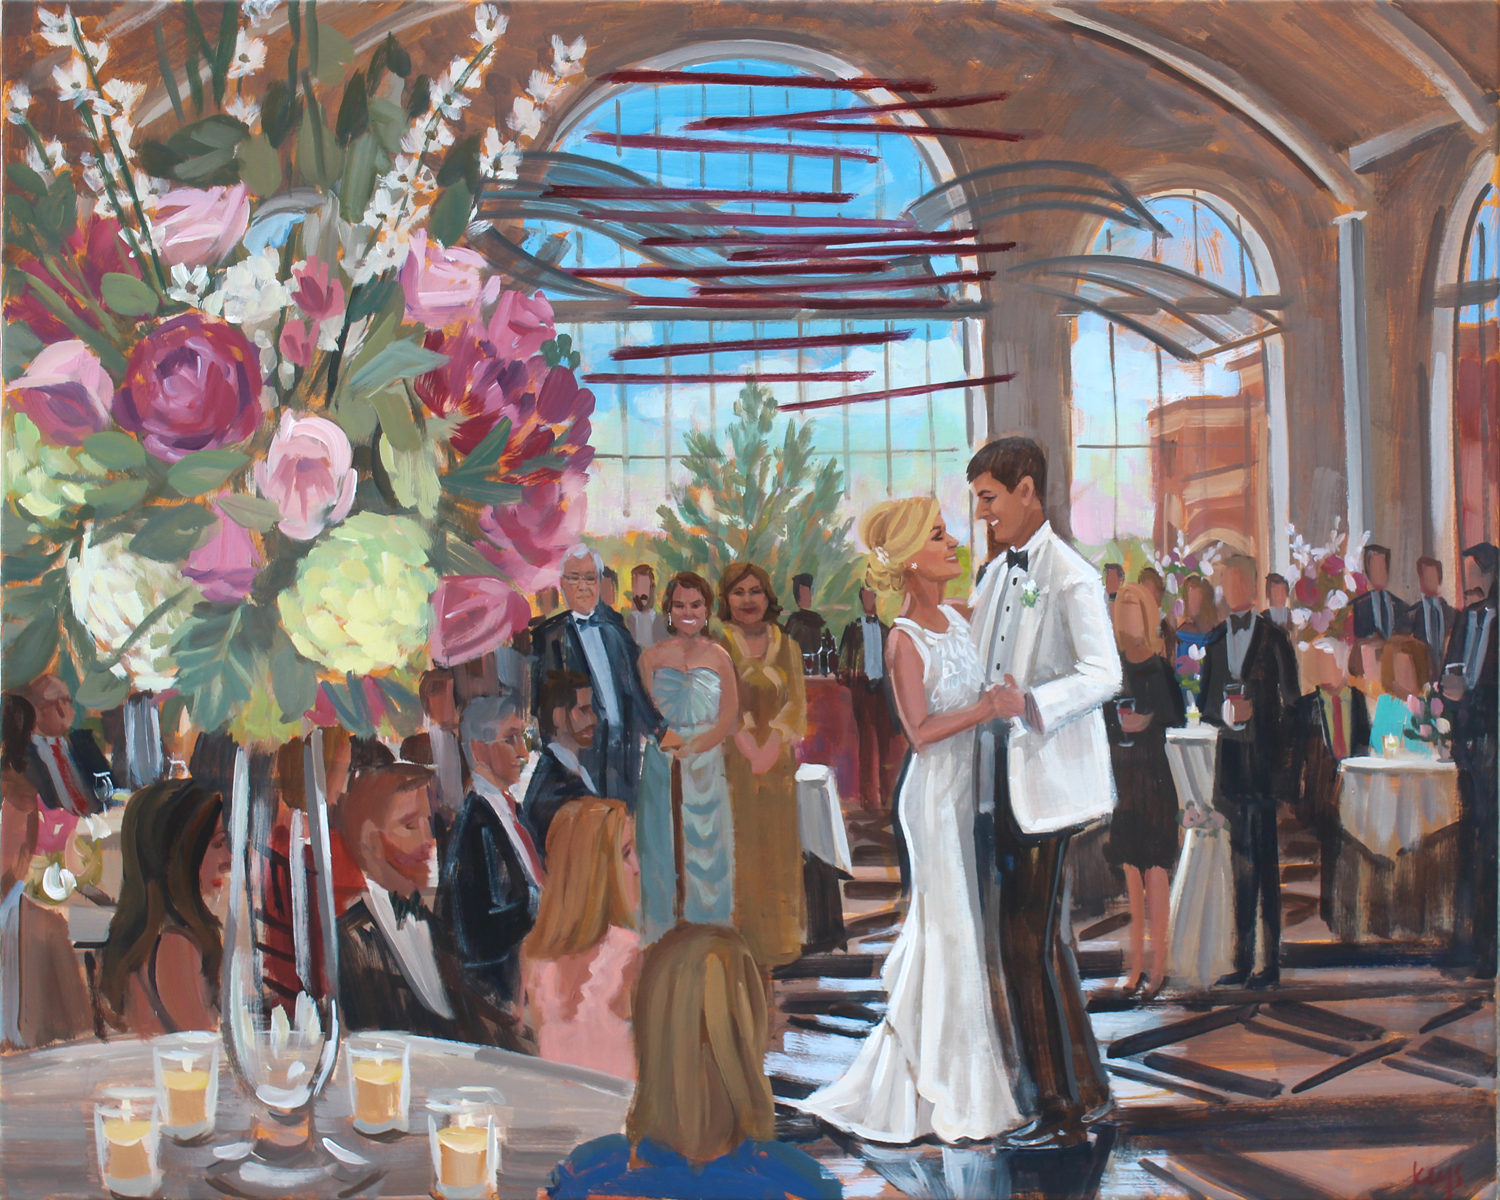 Live Wedding Painter, Ben Keys, captured Claire + Patrick's first dance at The Classic Center in Athens, Georgia.